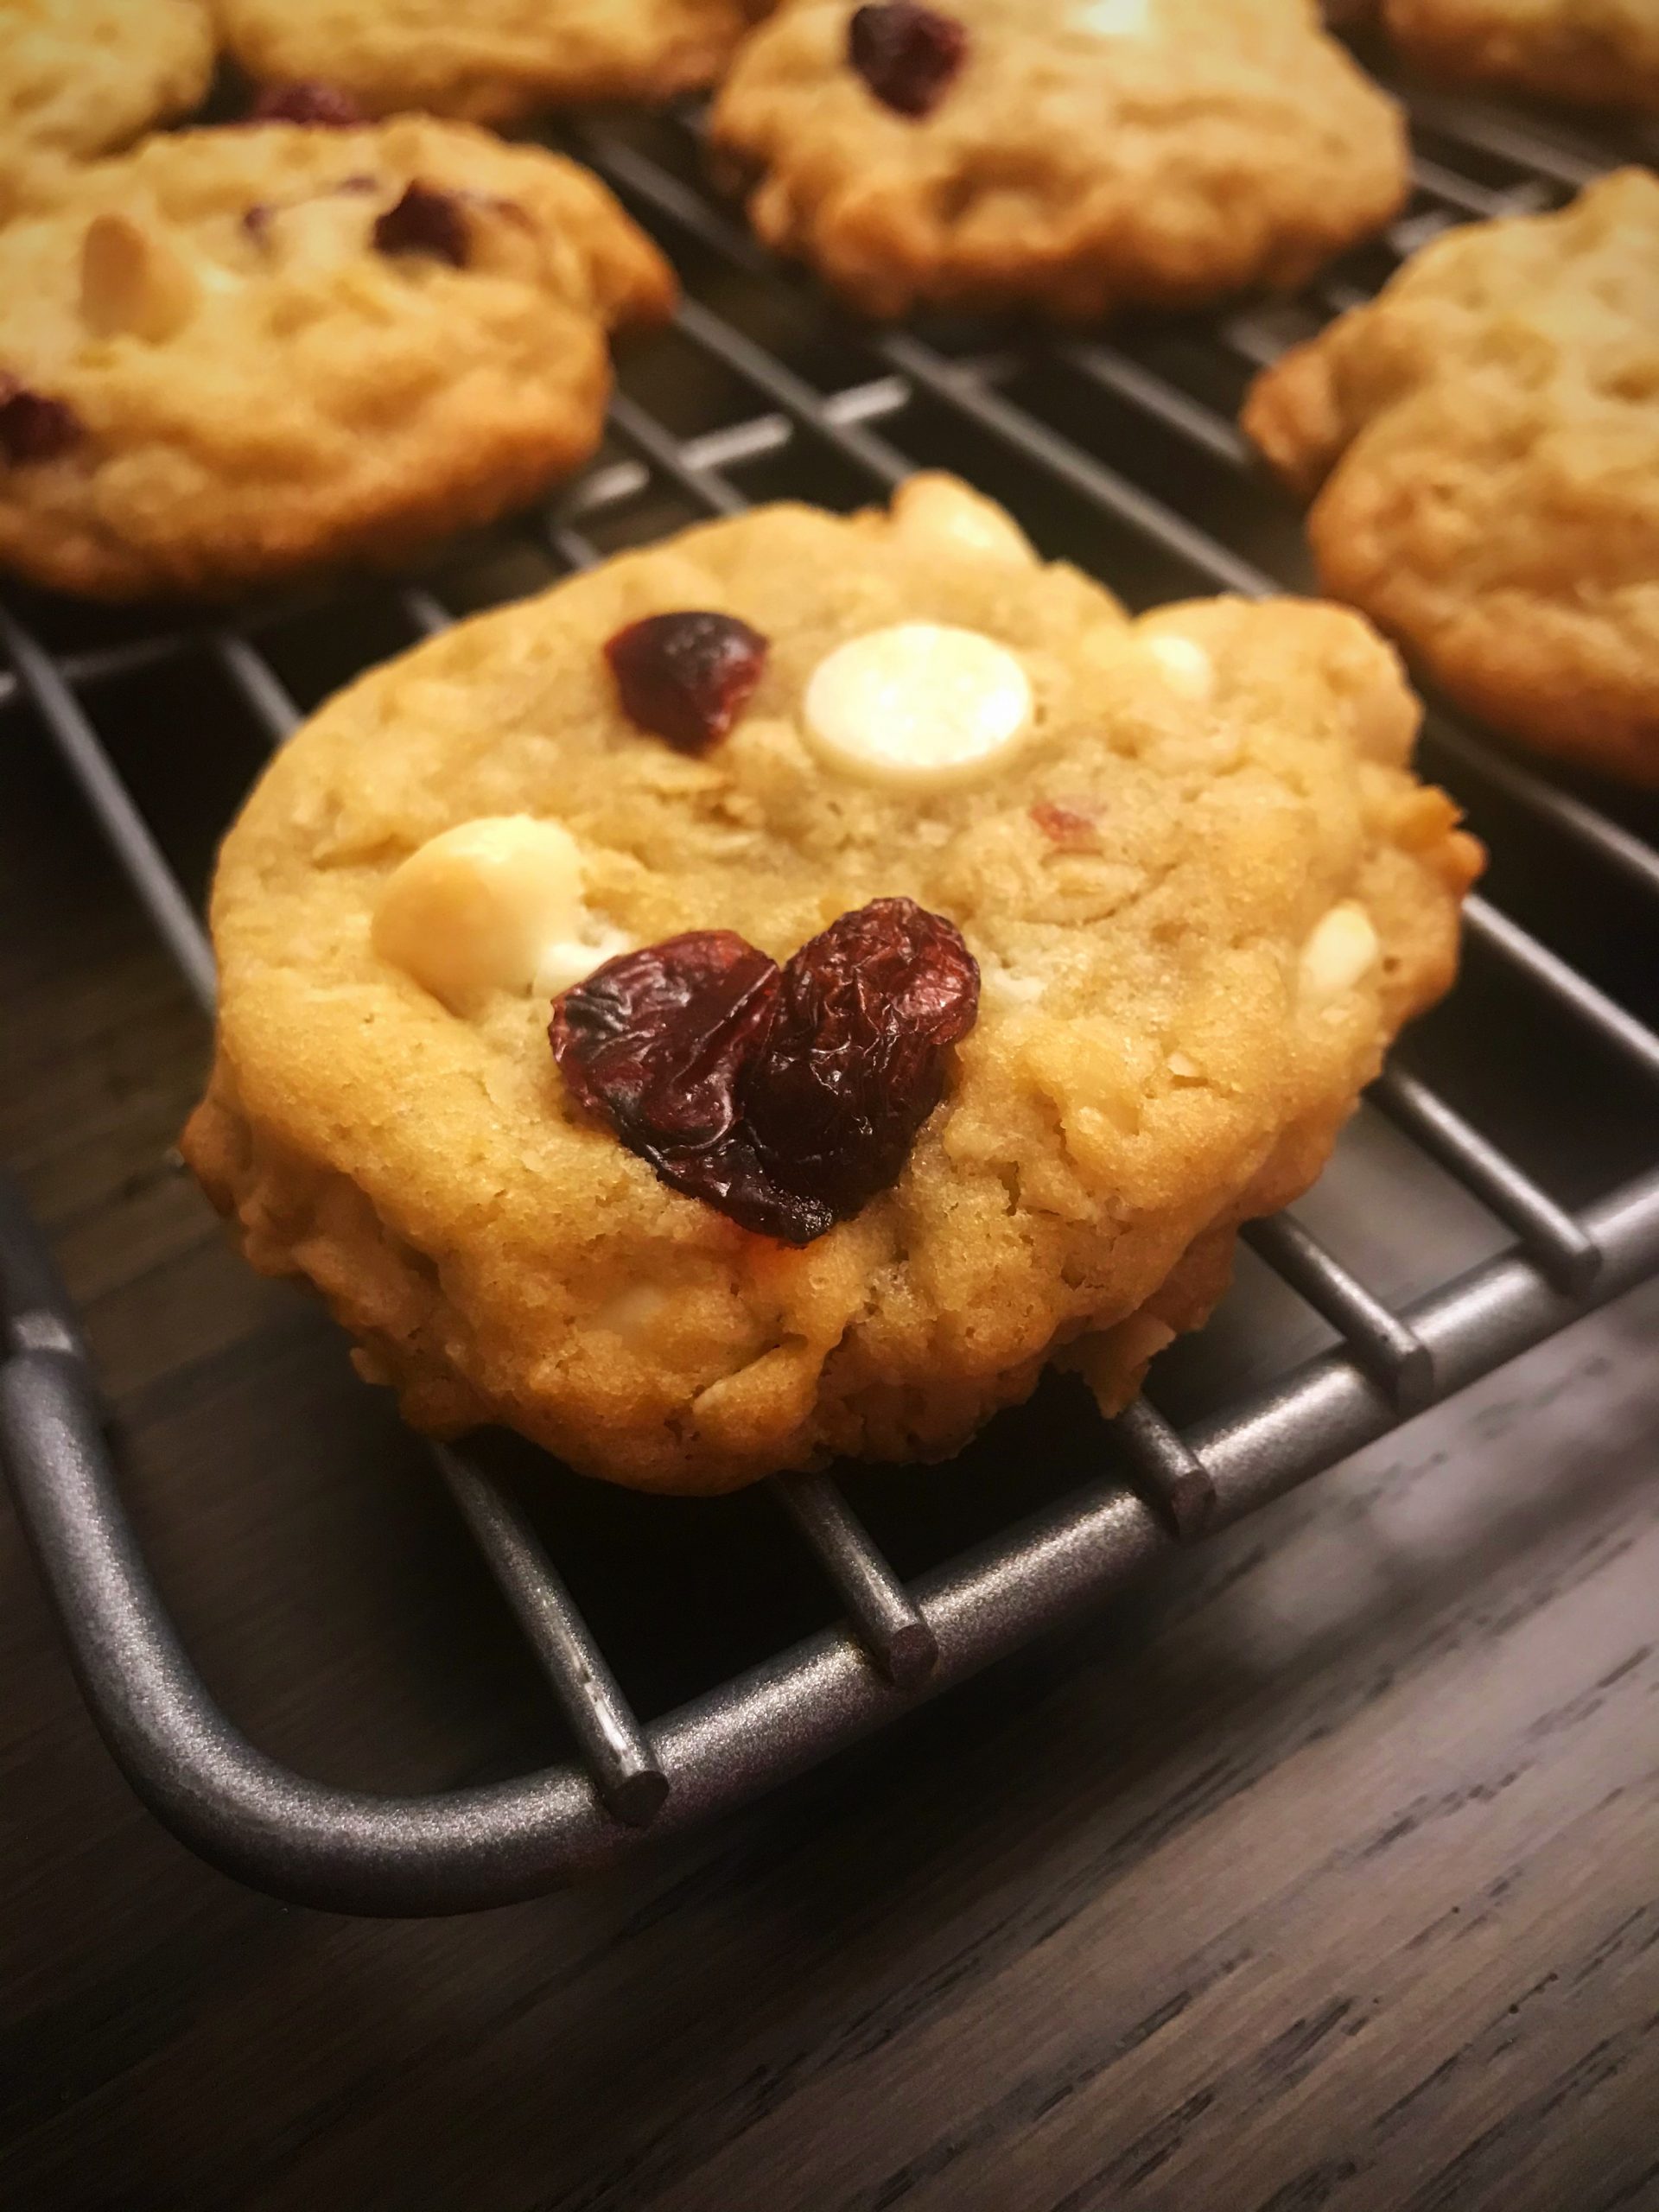 These Oatmeal White Chocolate Cranberry Cookies are a perfect addition to your Christmas cookie and holiday baking list! A great addition to any cookie tray, they are chewy and full of flavor!!